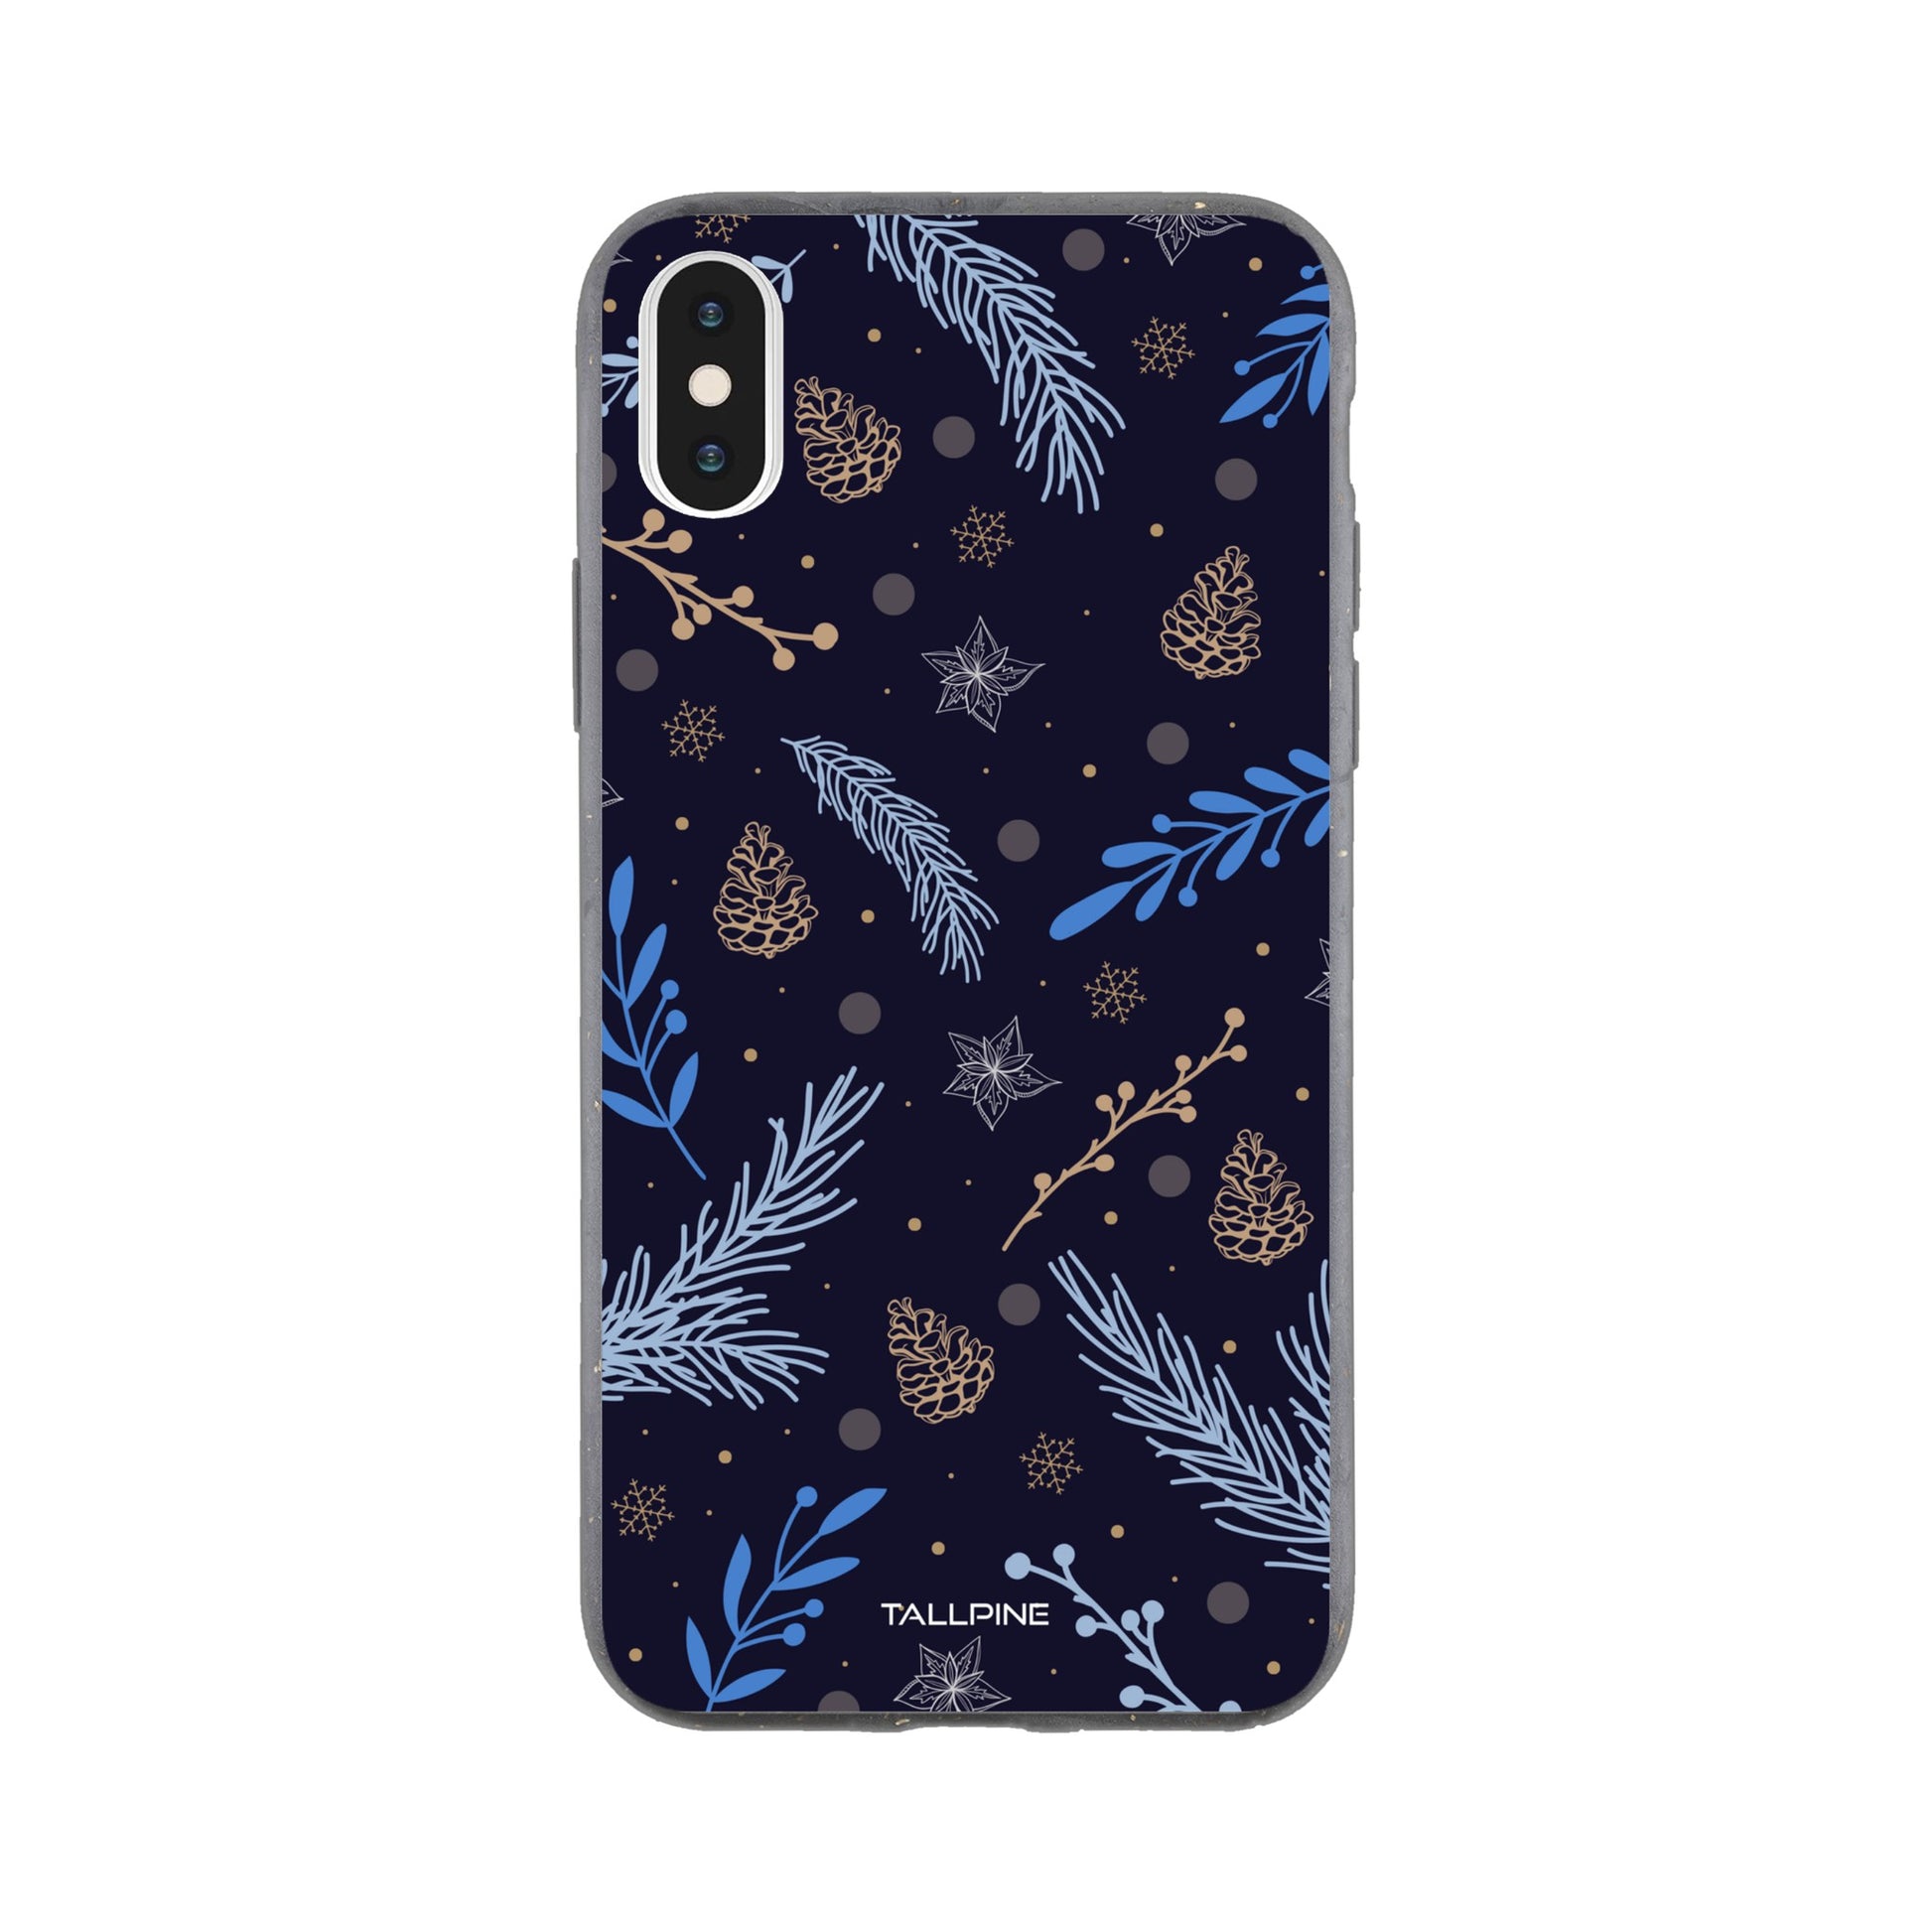 Arctic Dreams - Eco Case iPhone XS - Tallpine Cases | Sustainable and Eco-Friendly - Nature